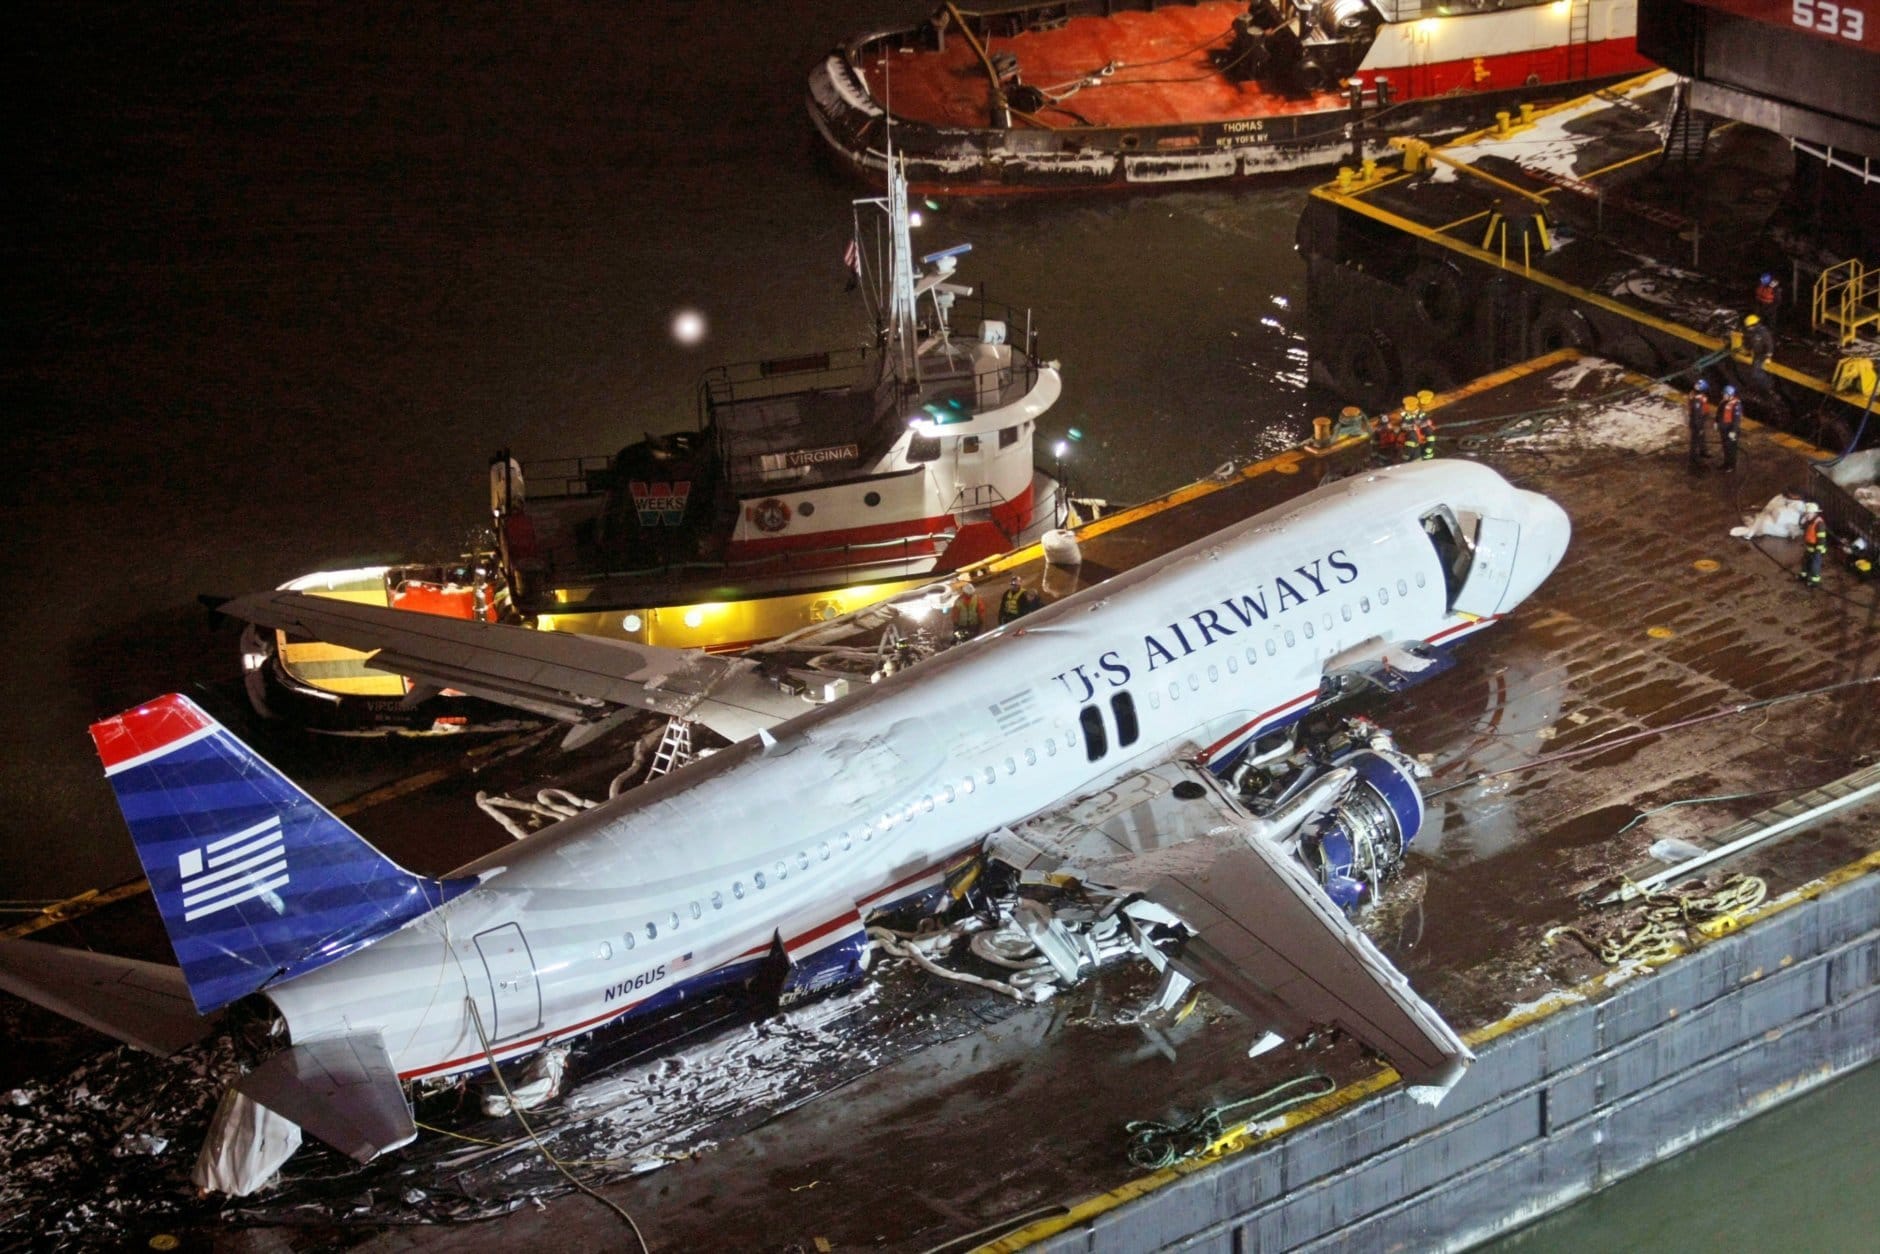 U.S. Airways flight 1549, an Airbus A320 that made an emergency landing Thursday in the Hudson River sits on a barge after being lifted out of the river in New York, Sunday, Jan. 18, 2009. (AP Photo/Kathy Willens)